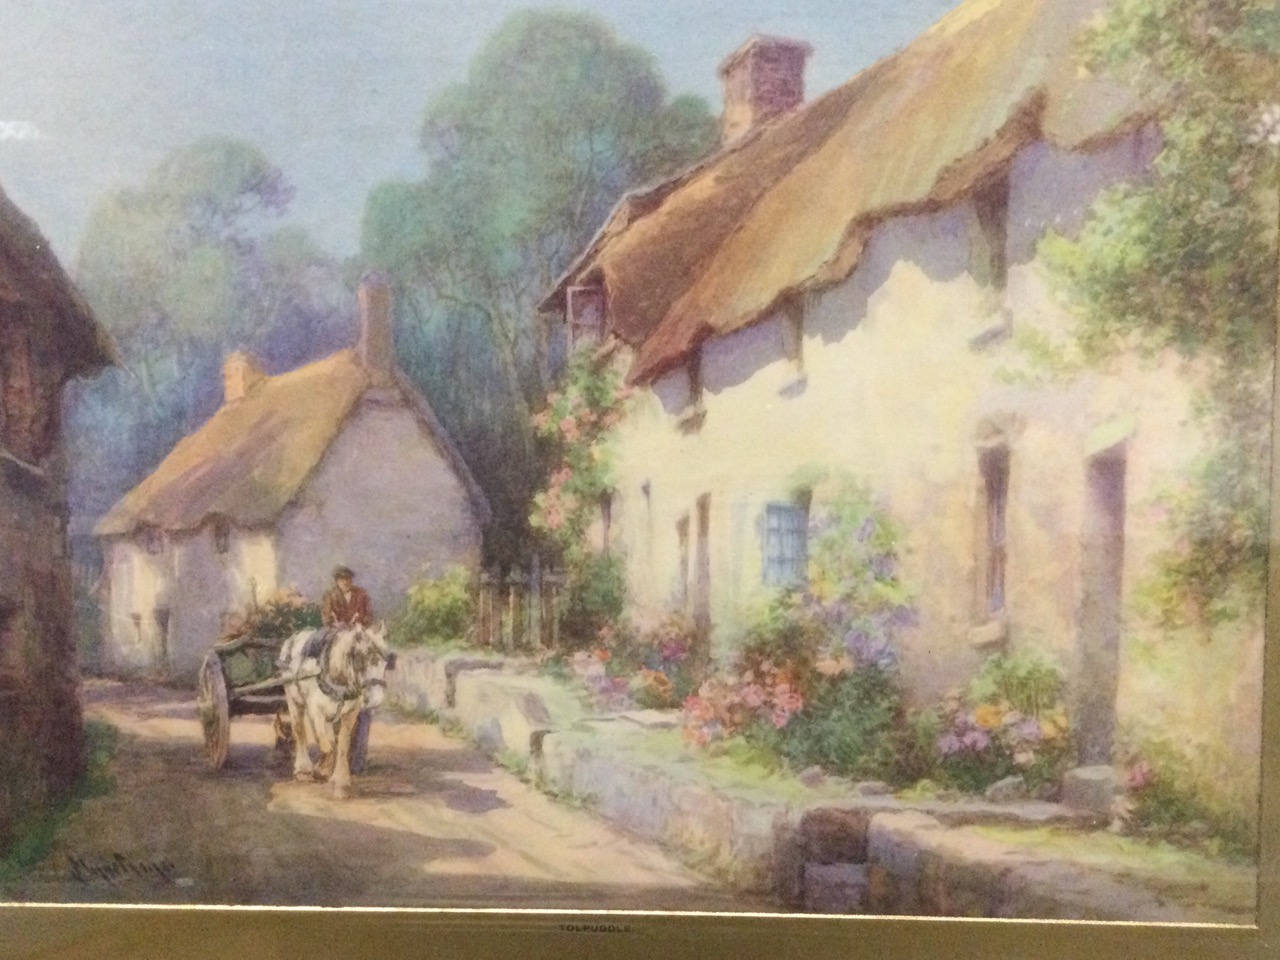 Myastinge?, a pair of late Victorian coloured rural prints of Tolpuddle, with thatched cottages - Image 2 of 3